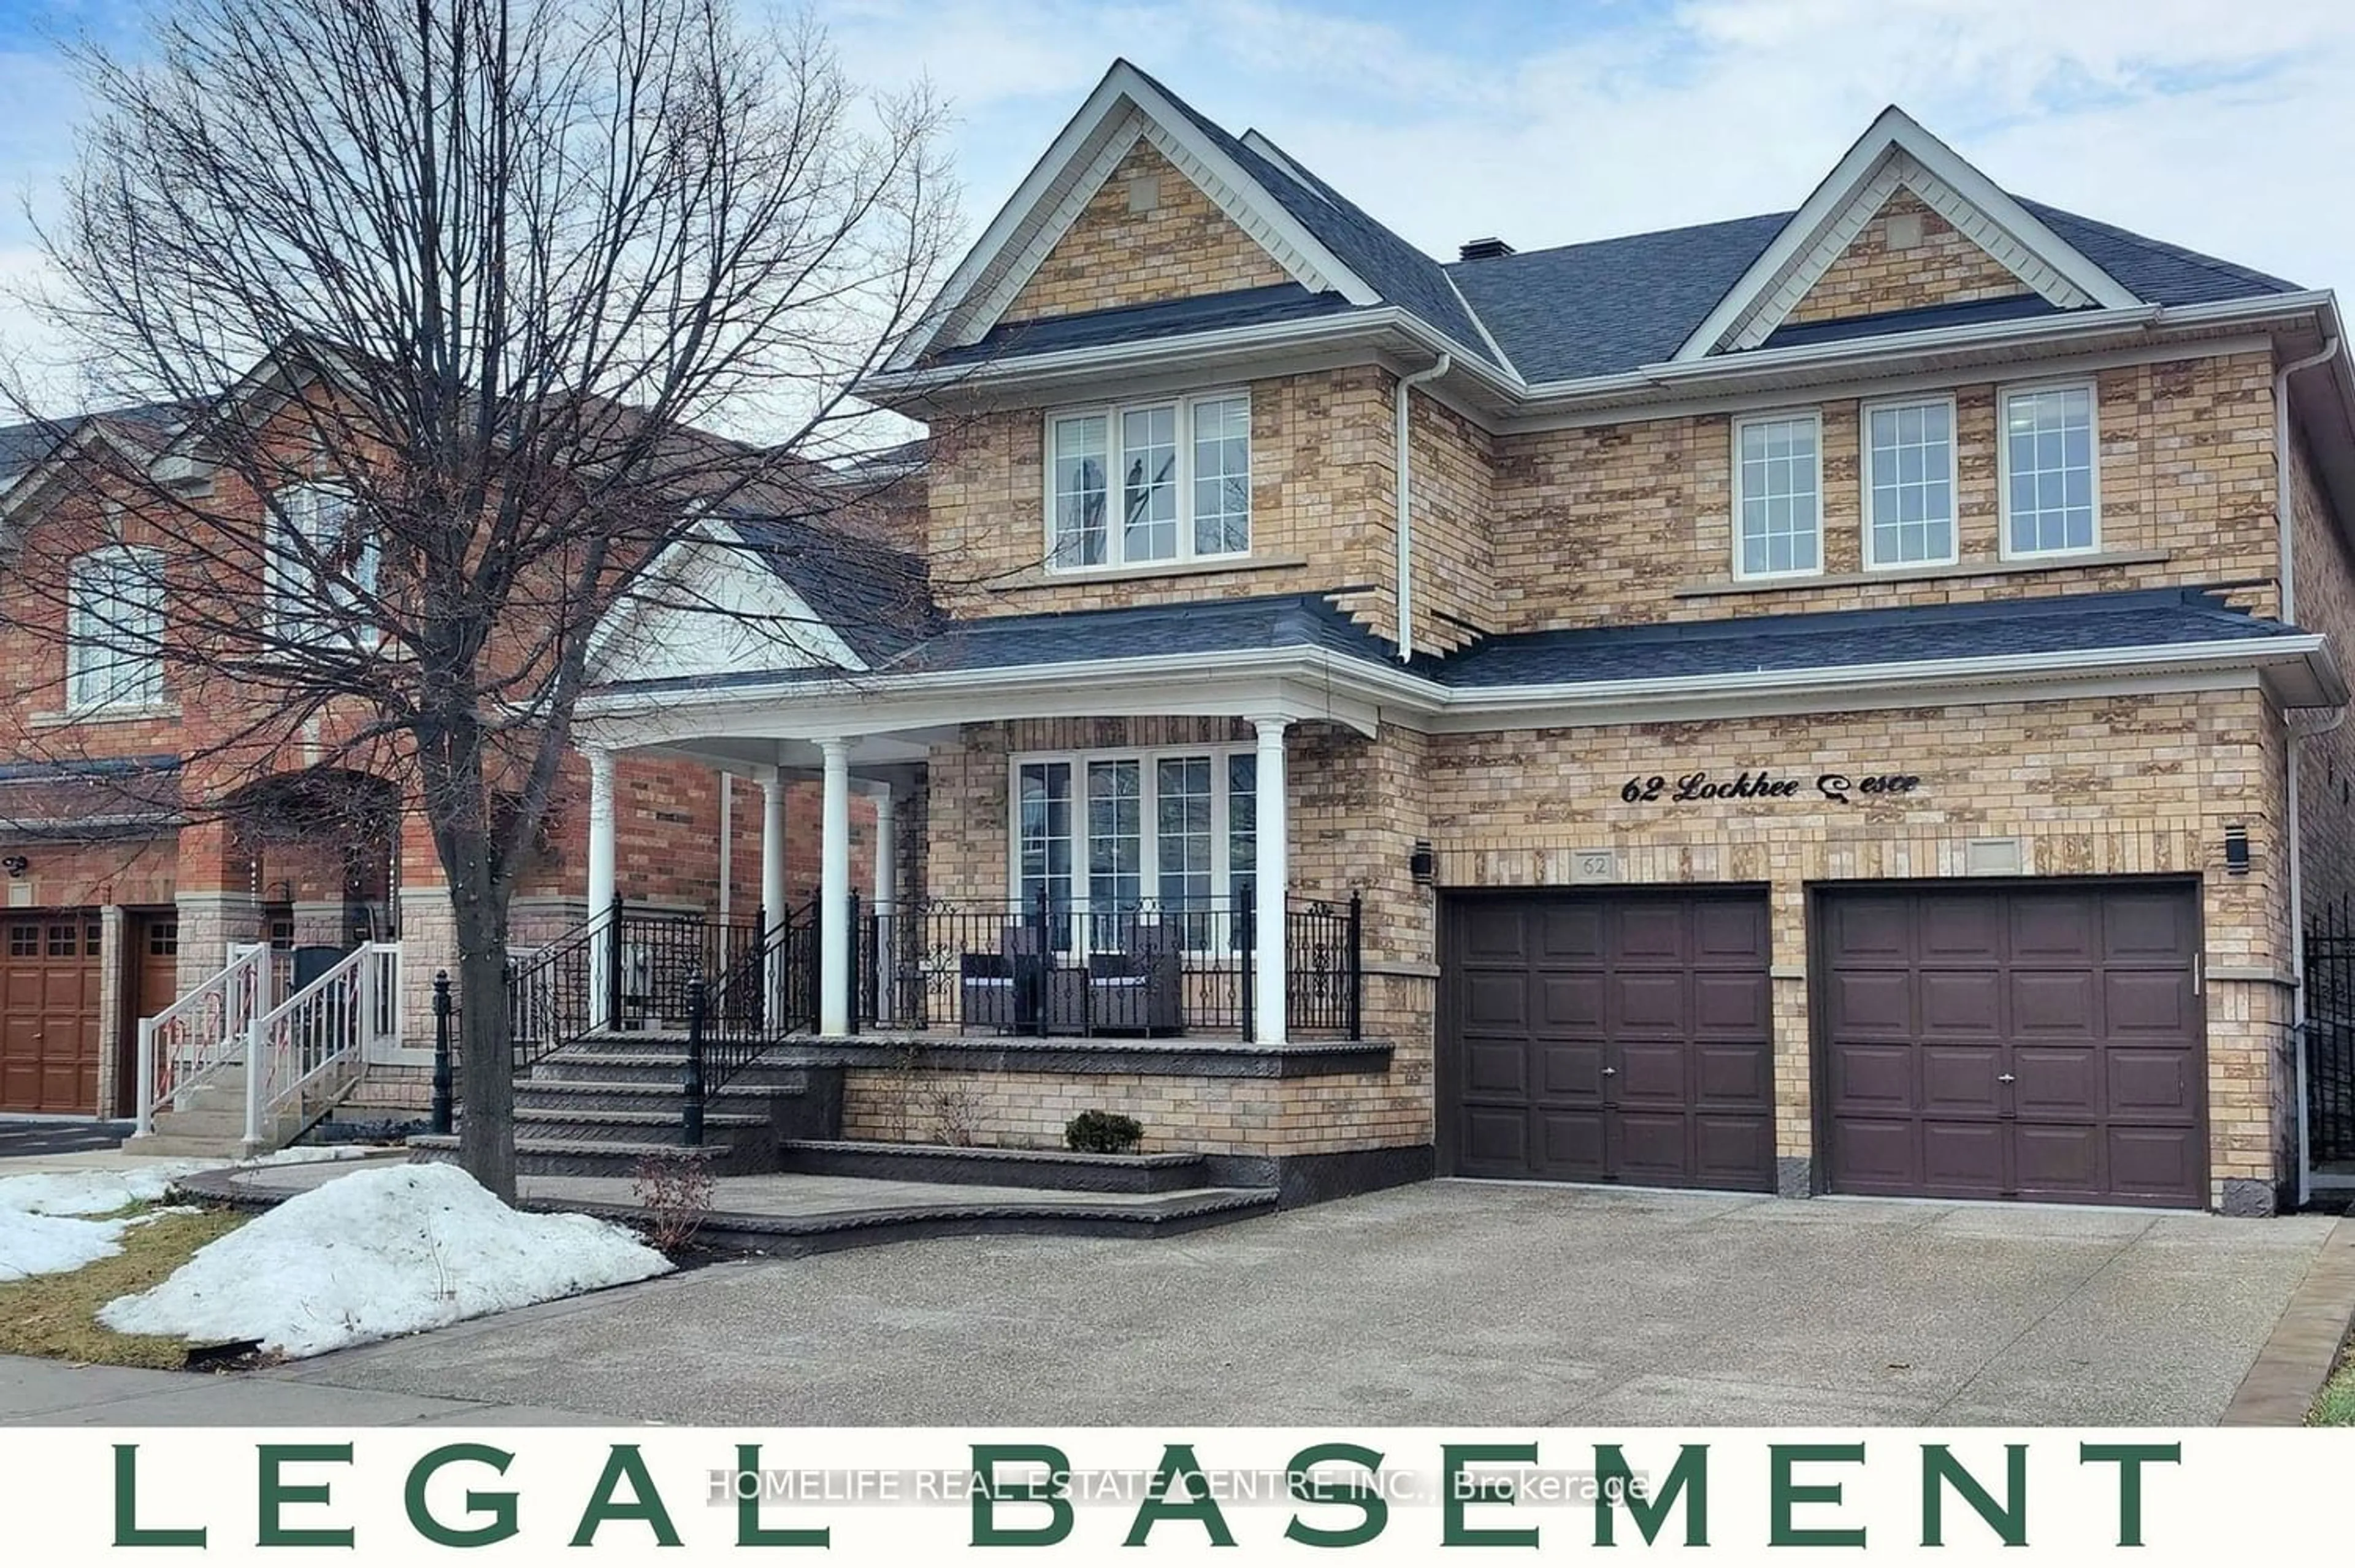 Home with brick exterior material for 62 Lockheed Cres, Brampton Ontario L7A 3G4